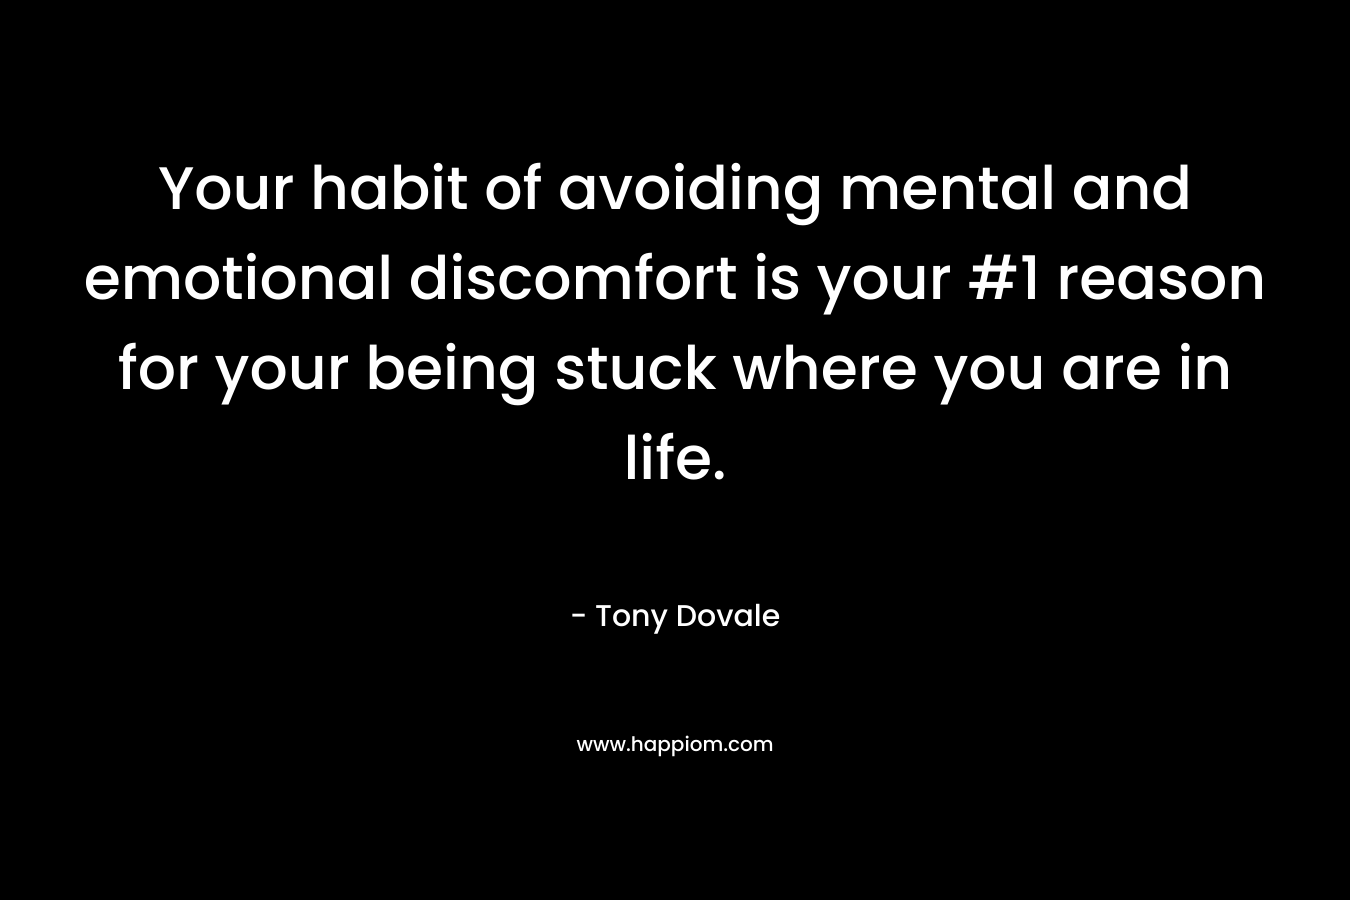 Your habit of avoiding mental and emotional discomfort is your #1 reason for your being stuck where you are in life.